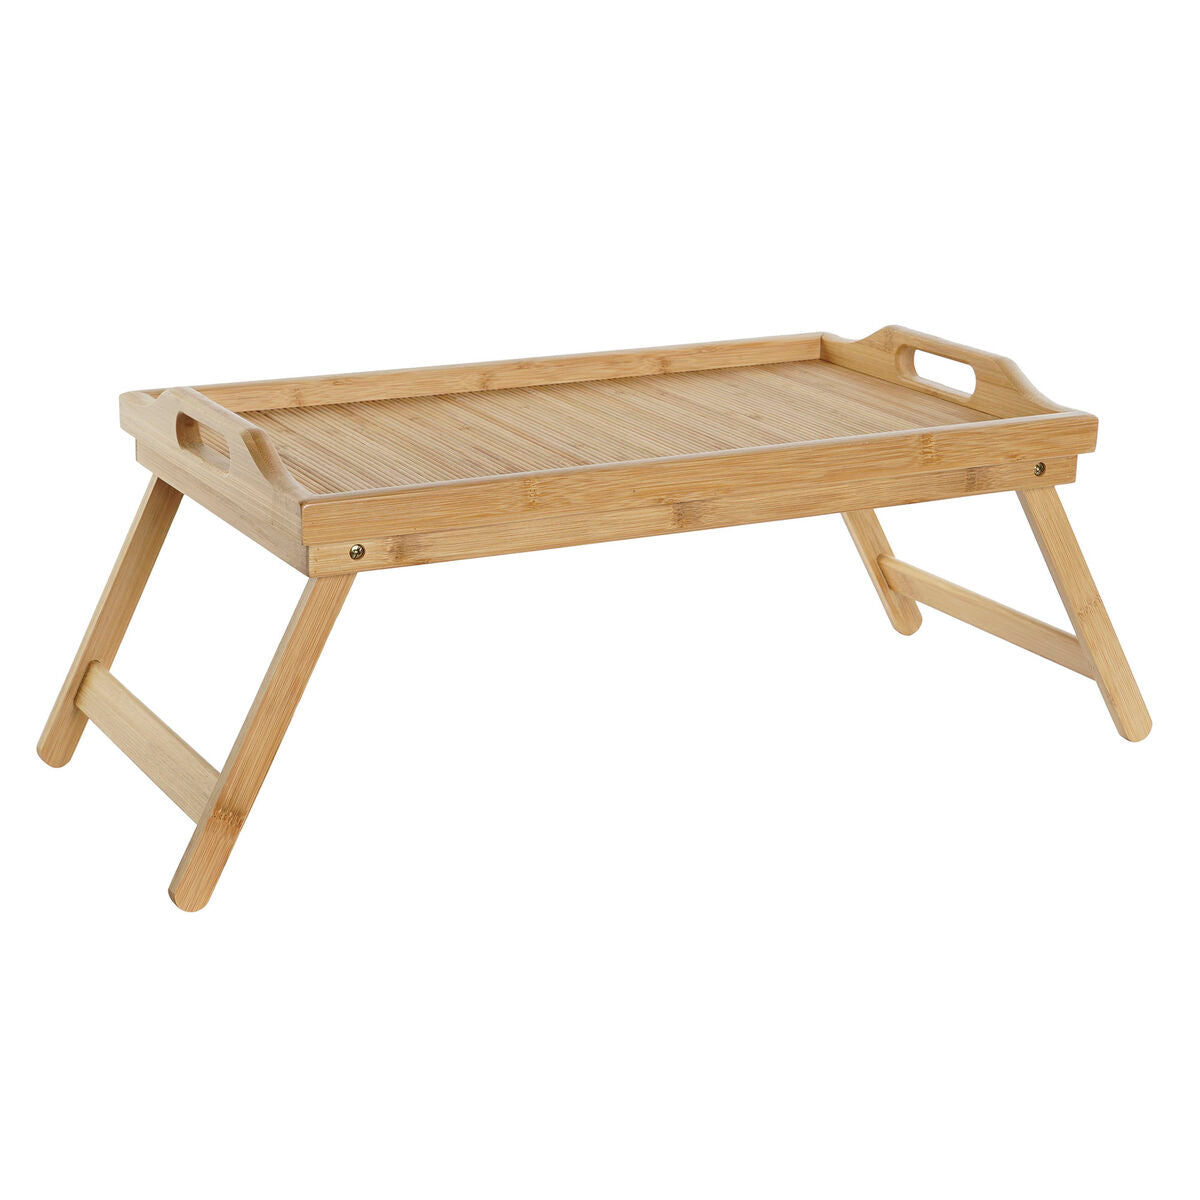 Stand DKD Home Decor Bamboo 64 x 30 x 24 cm